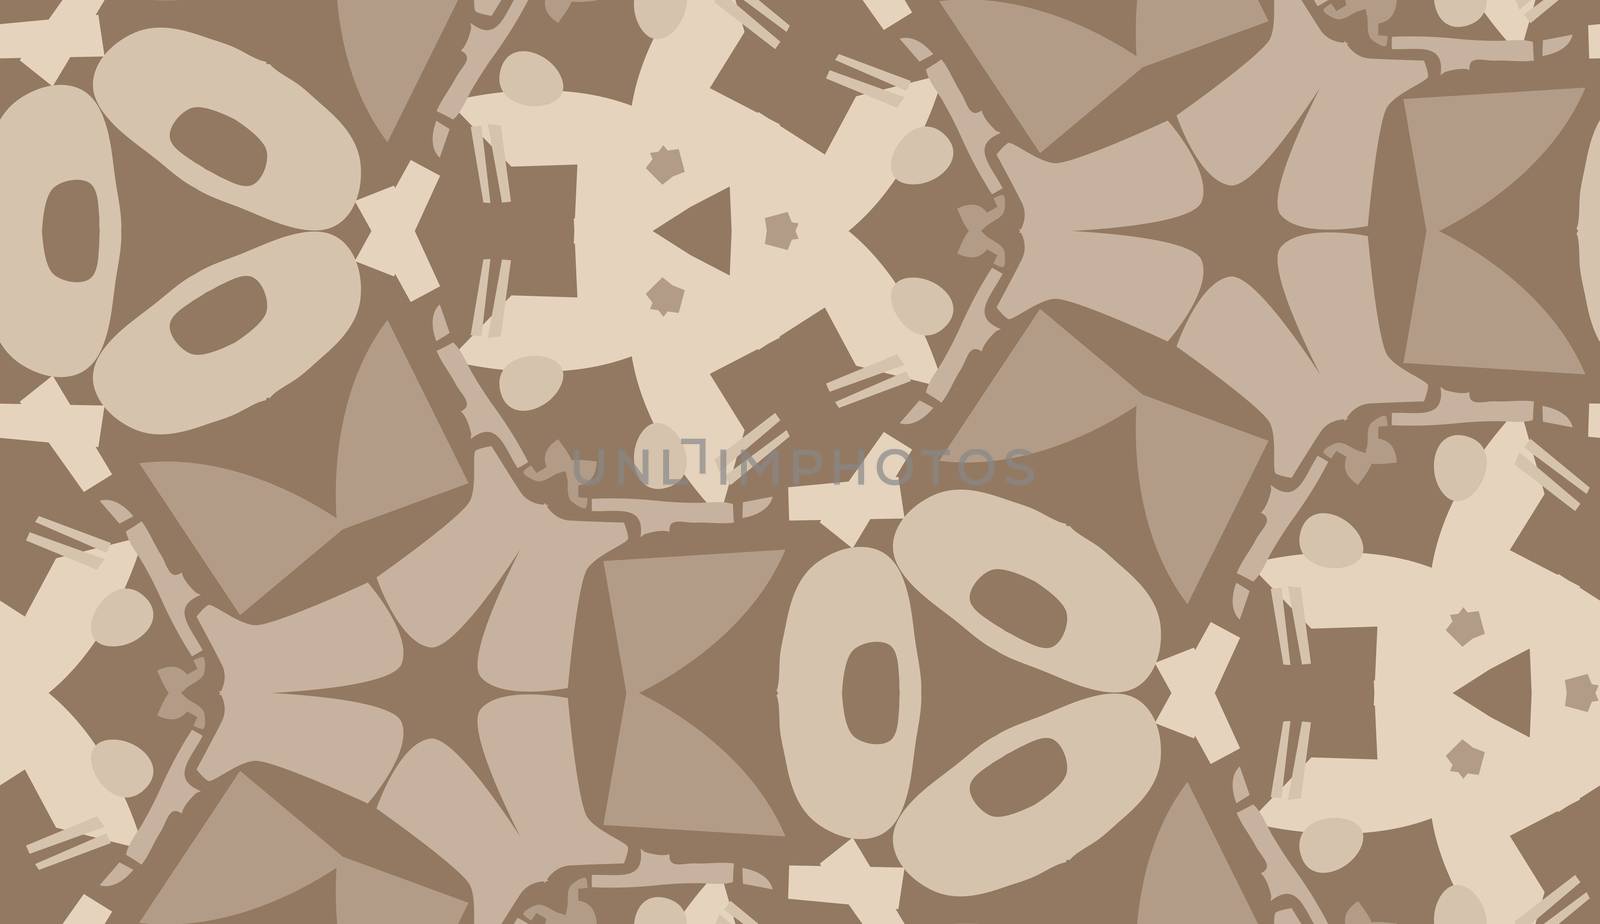 Seamless brown abstract shapes in repeating background pattern